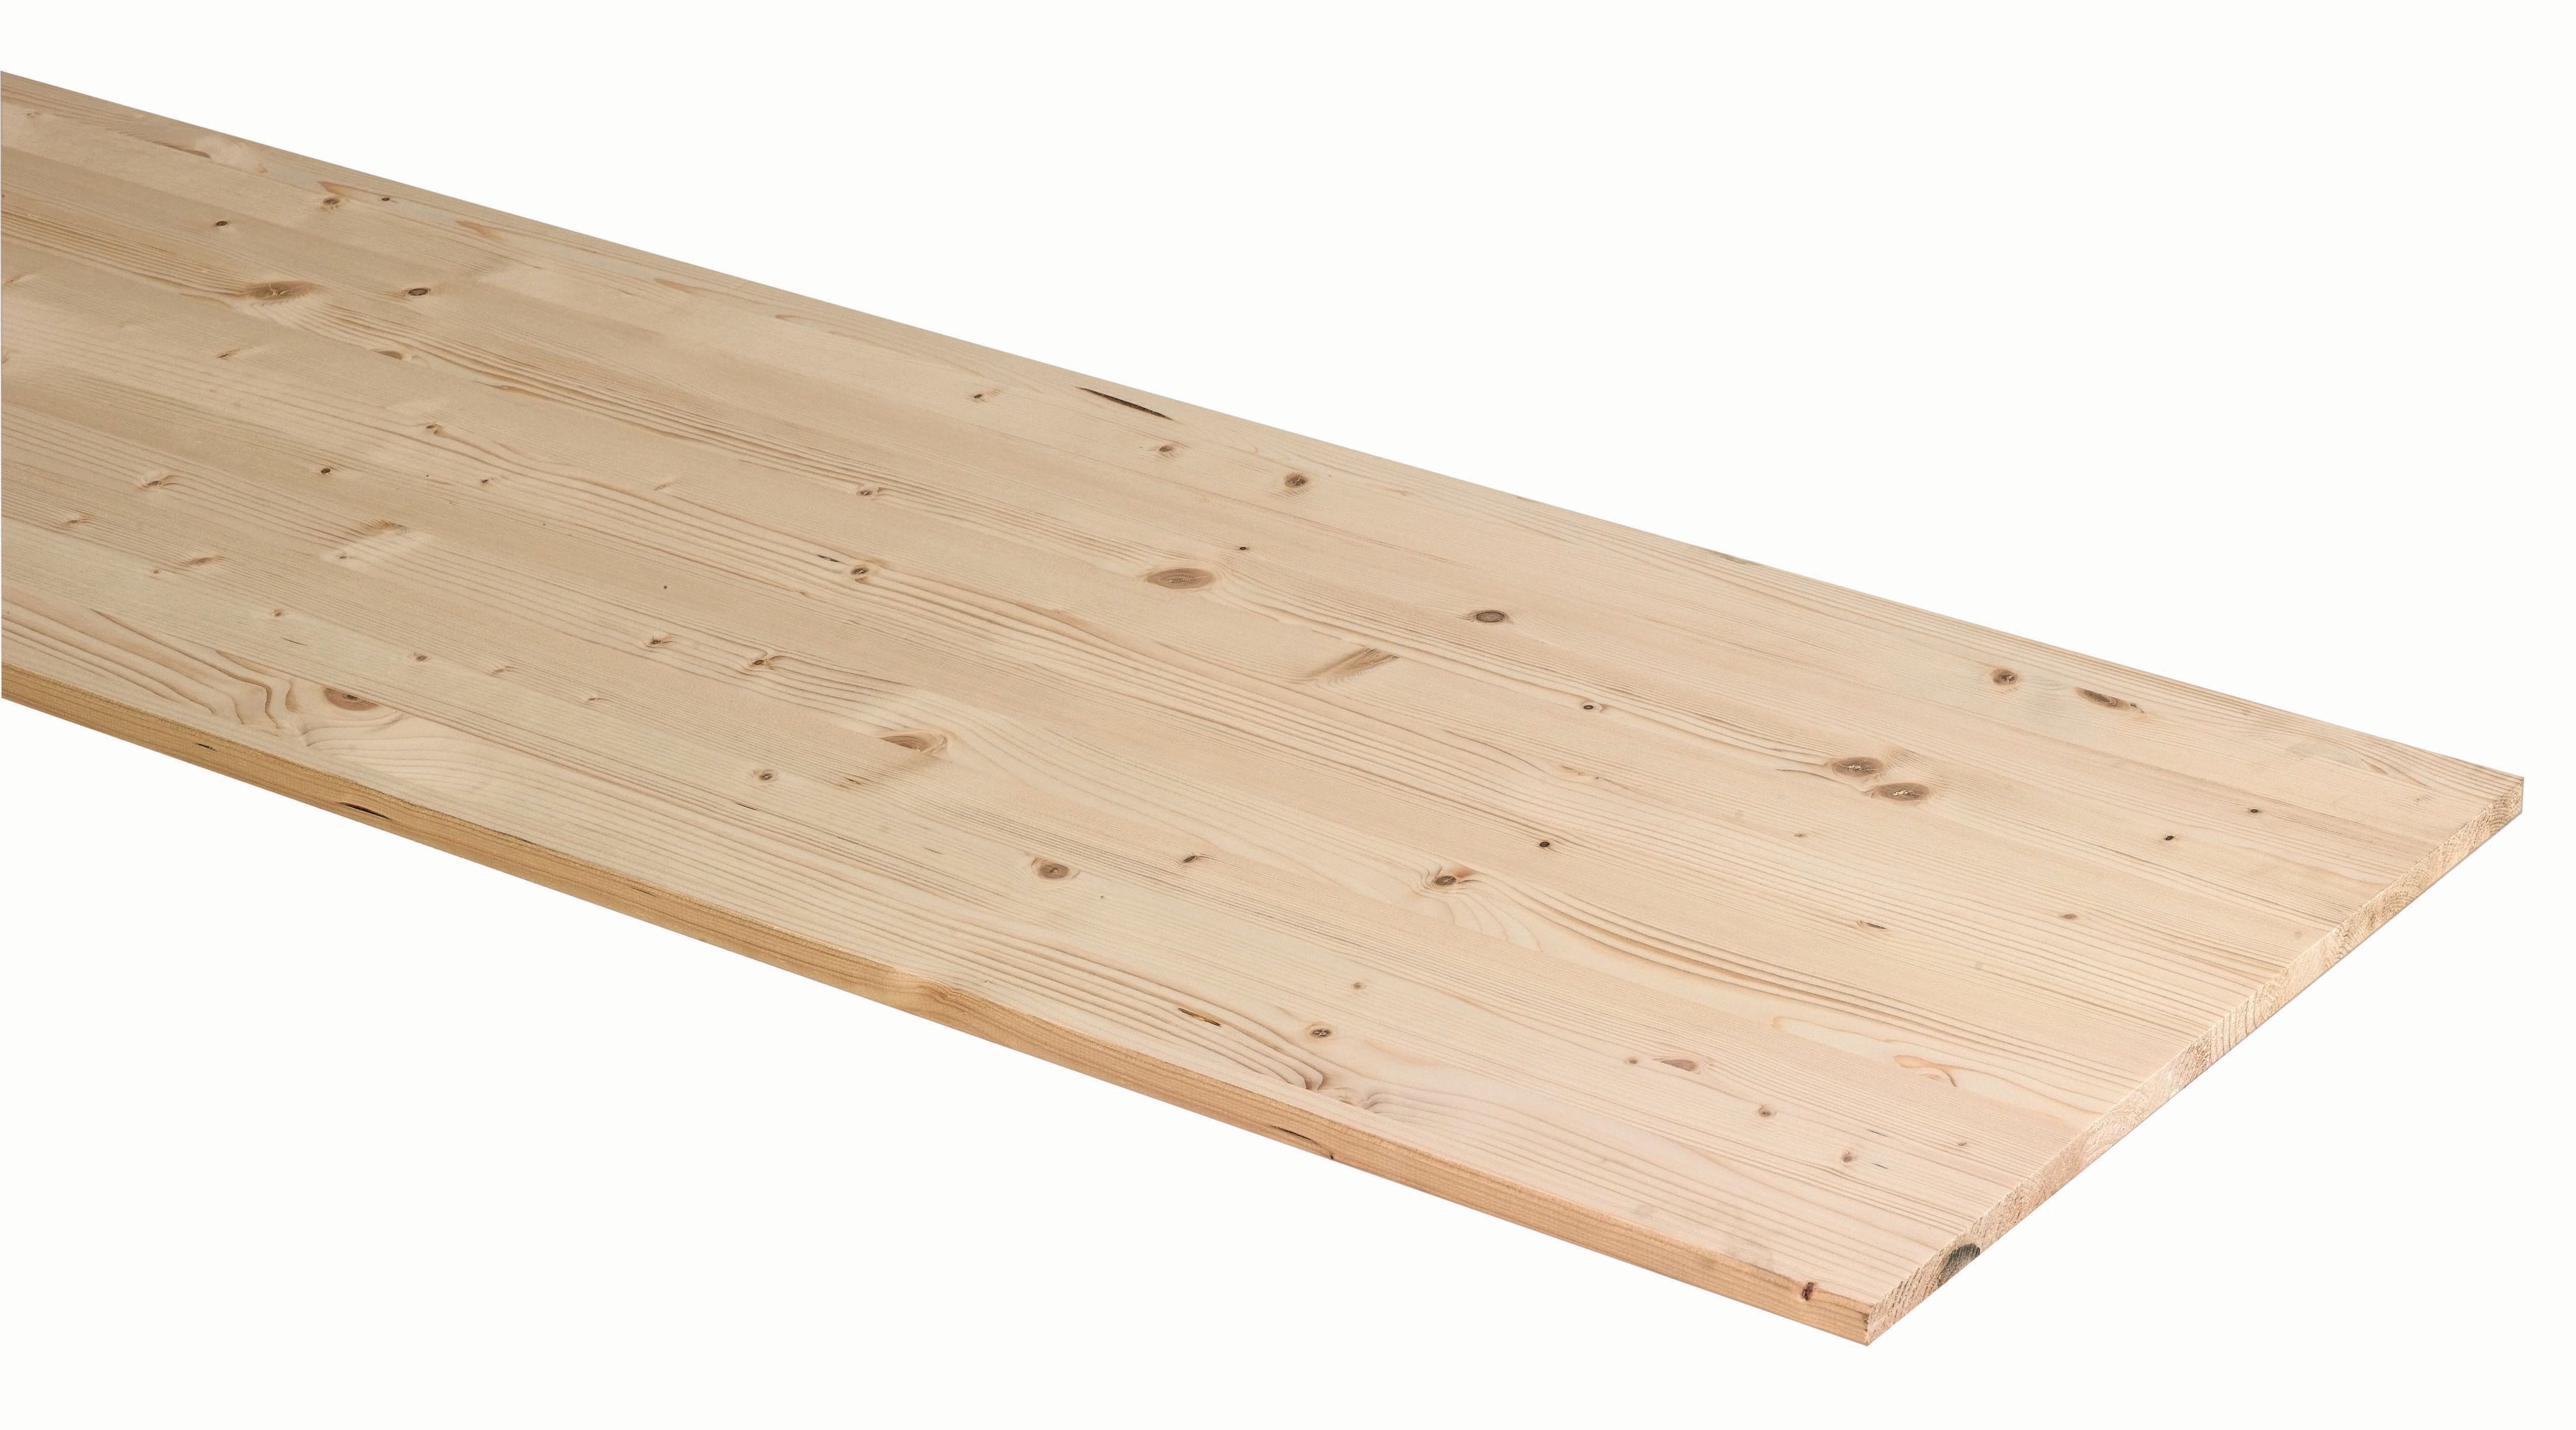 Image of Wickes General Purpose Spruce Timberboard - 18mm x 500mm x 2350mm